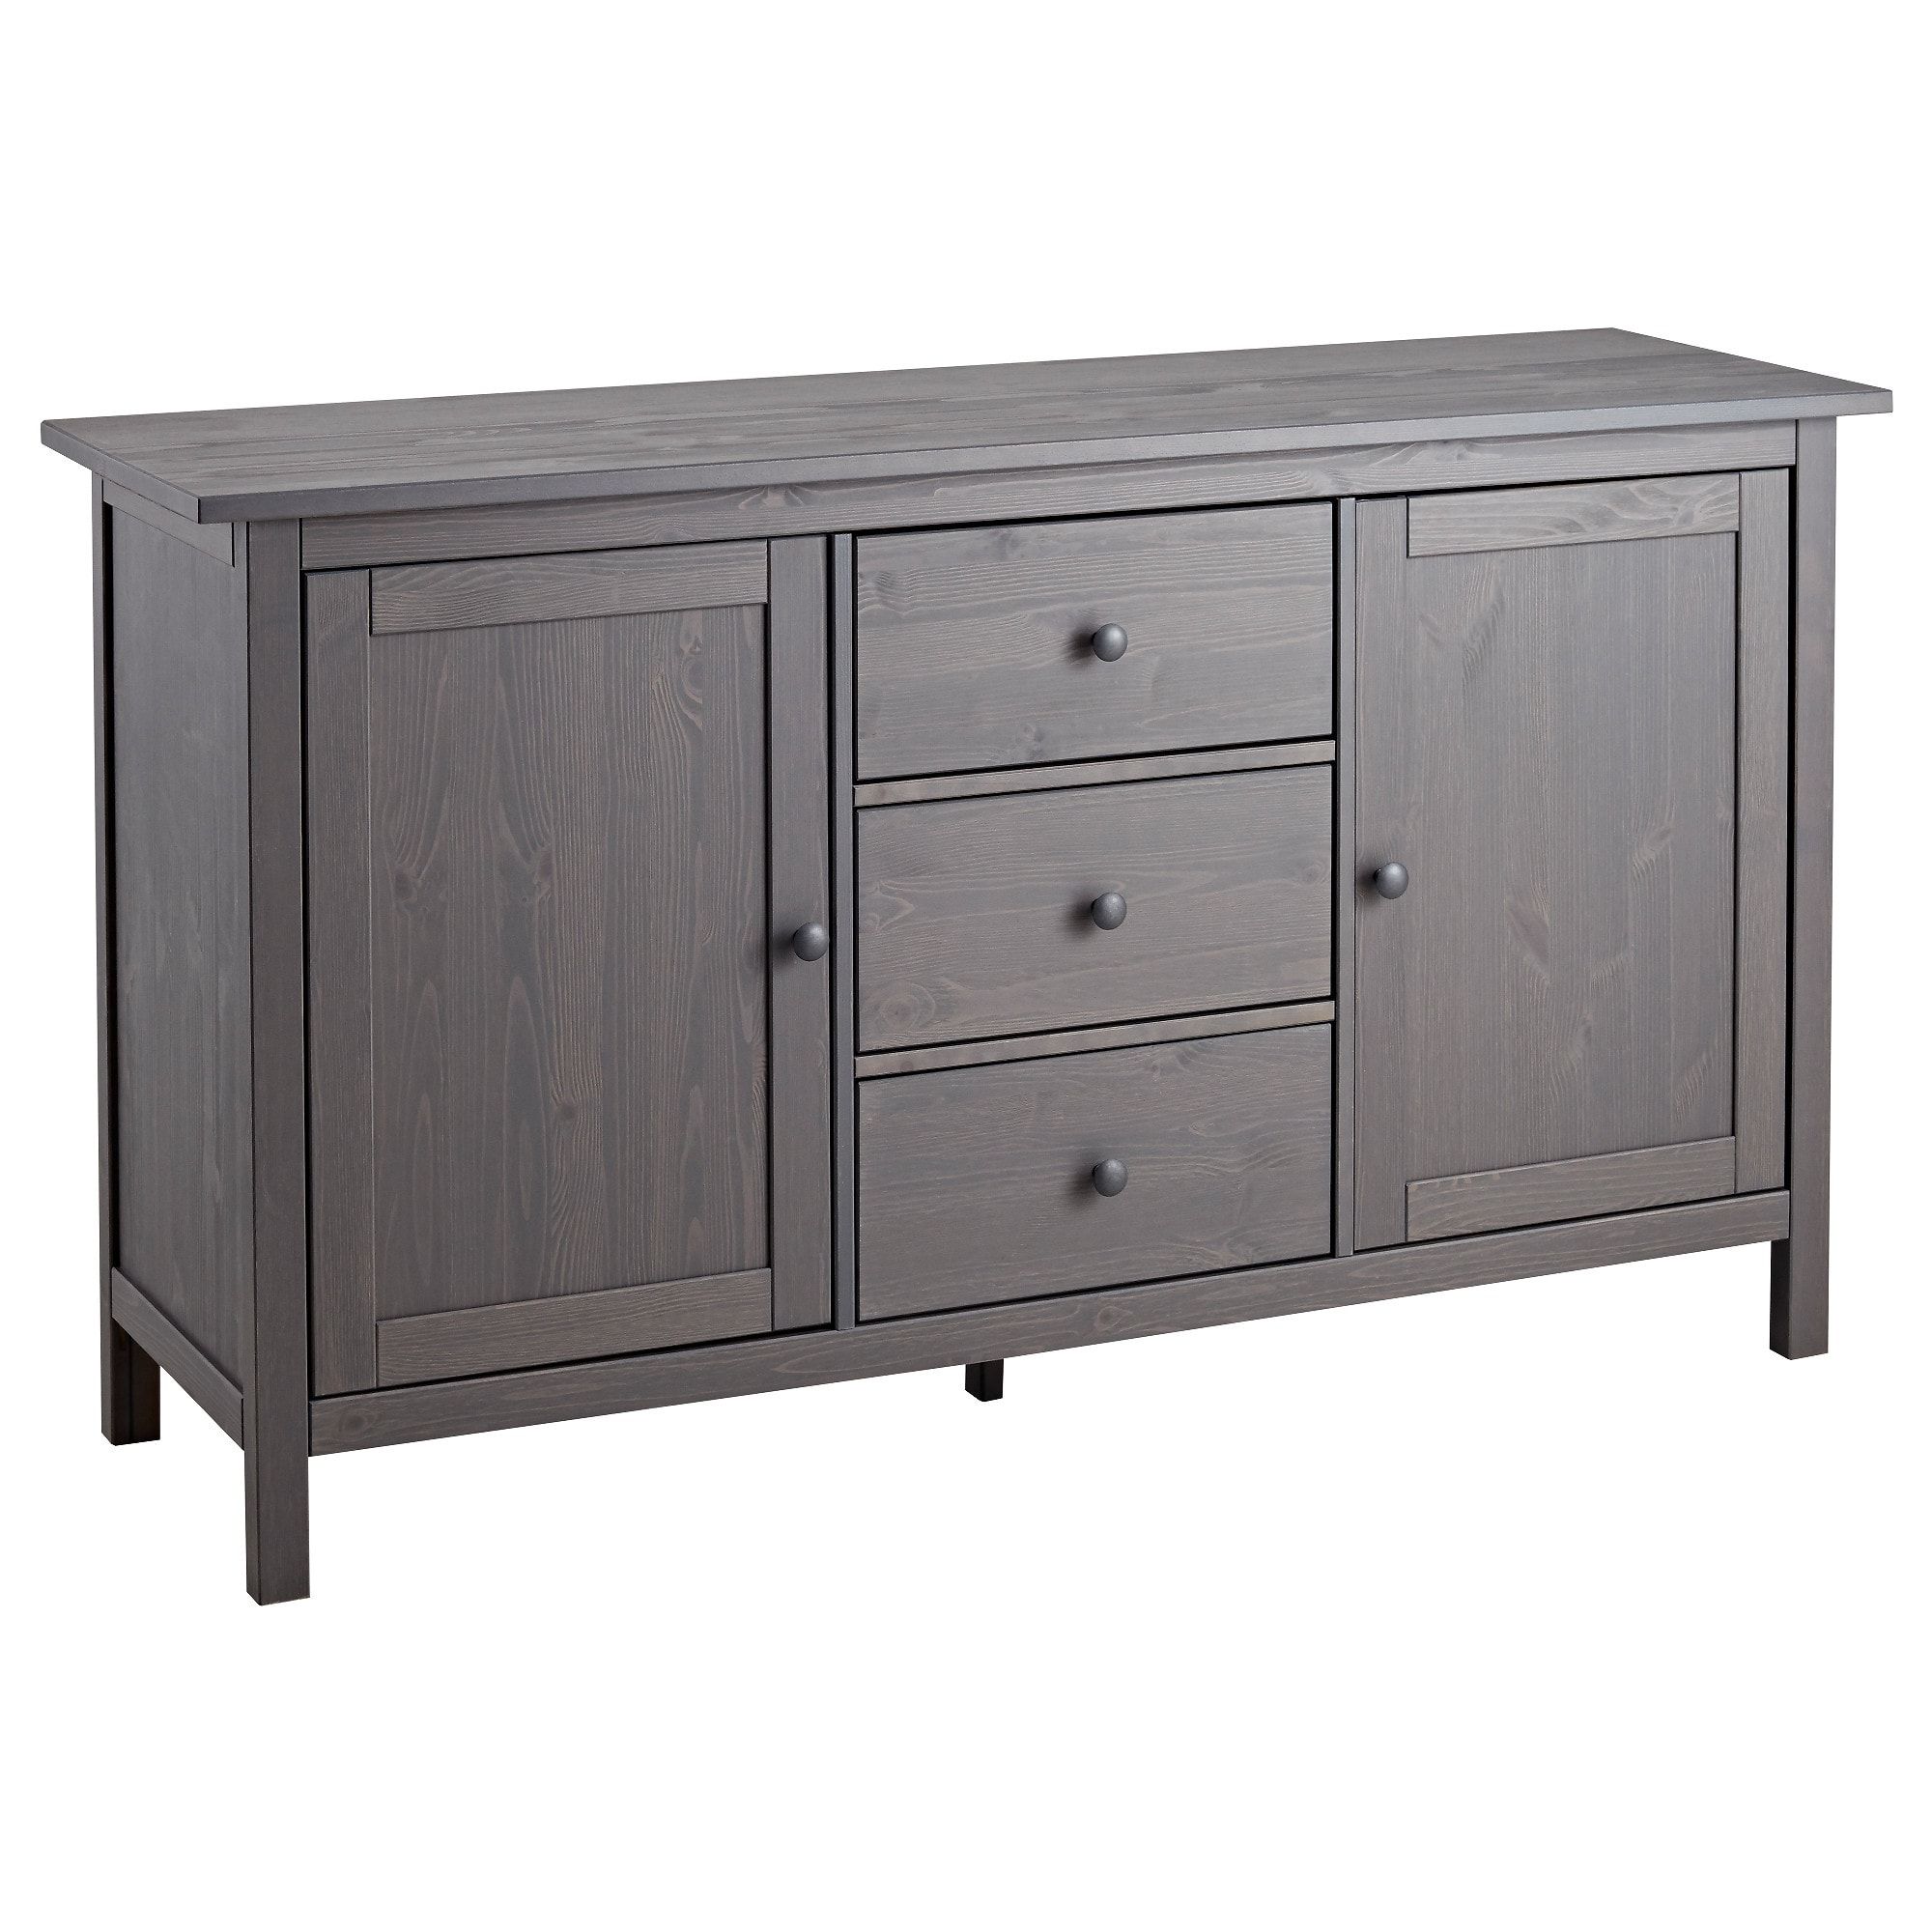 Widely Used Hemnes Sideboard – Dark Gray Stained – Ikea For North York Sideboards (View 13 of 20)